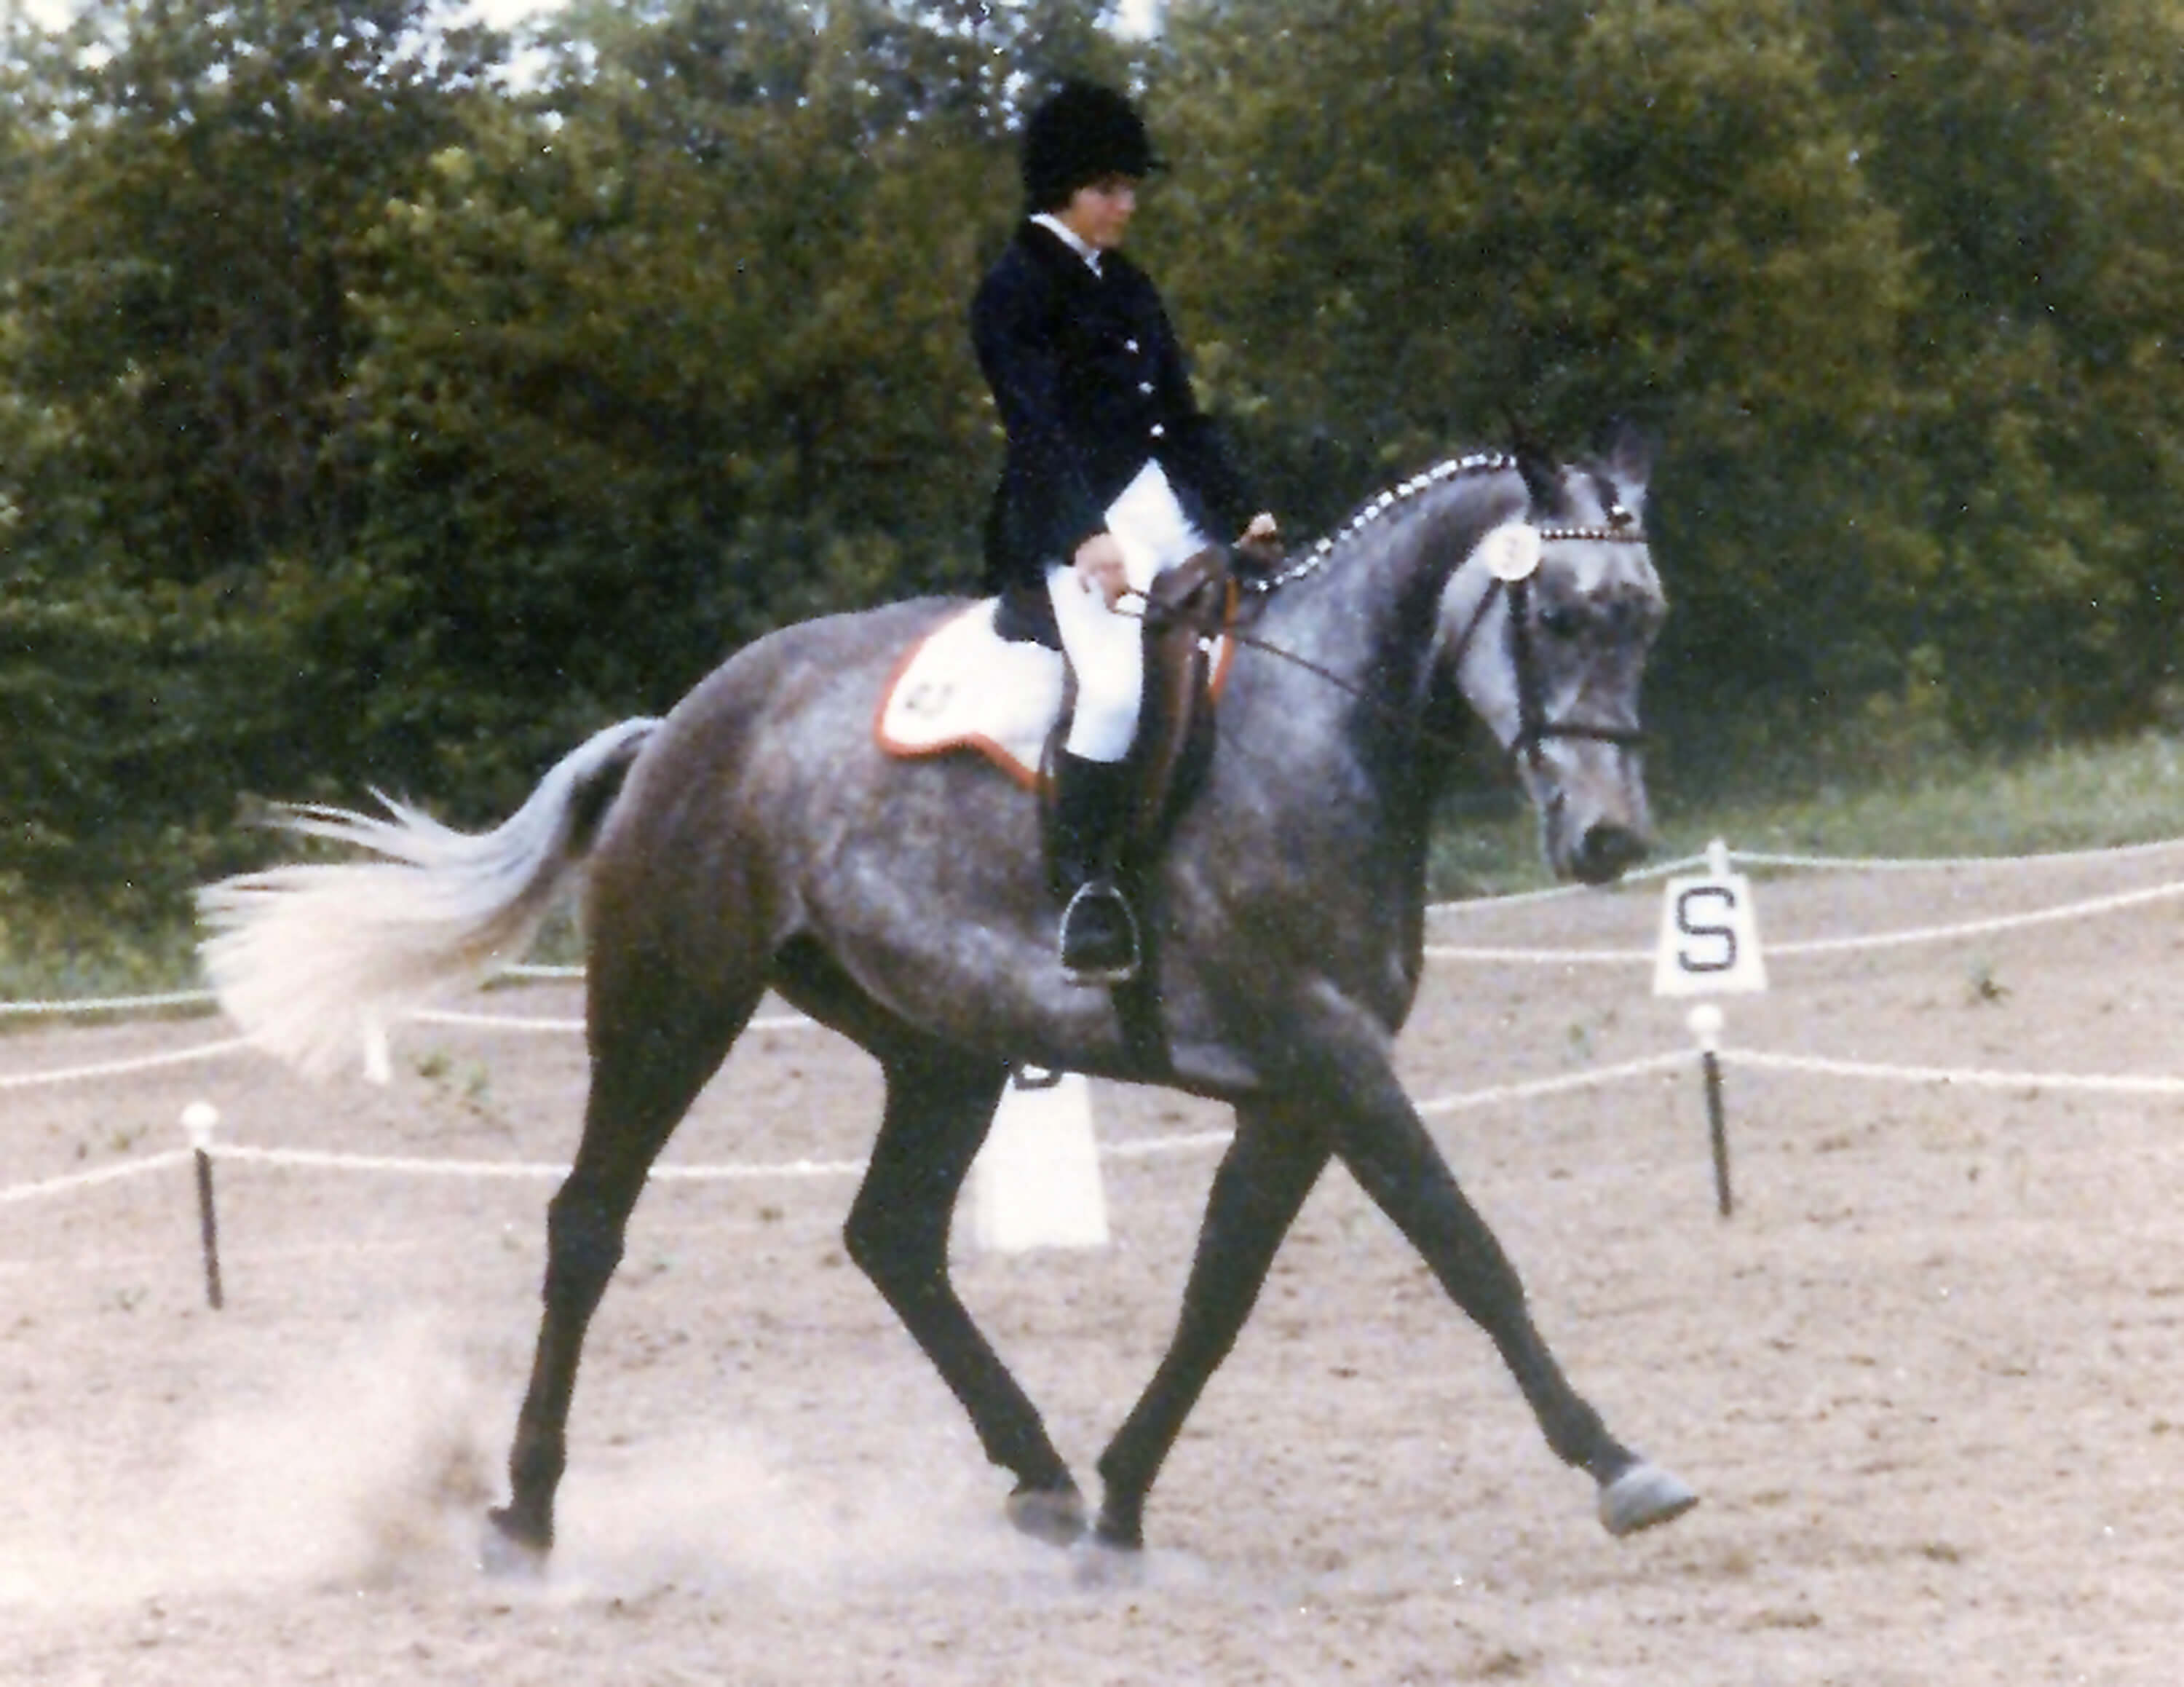 Leanna with her horse Alpenglow. At age 16, Leanna was the youngest rider to win the regional championship. 